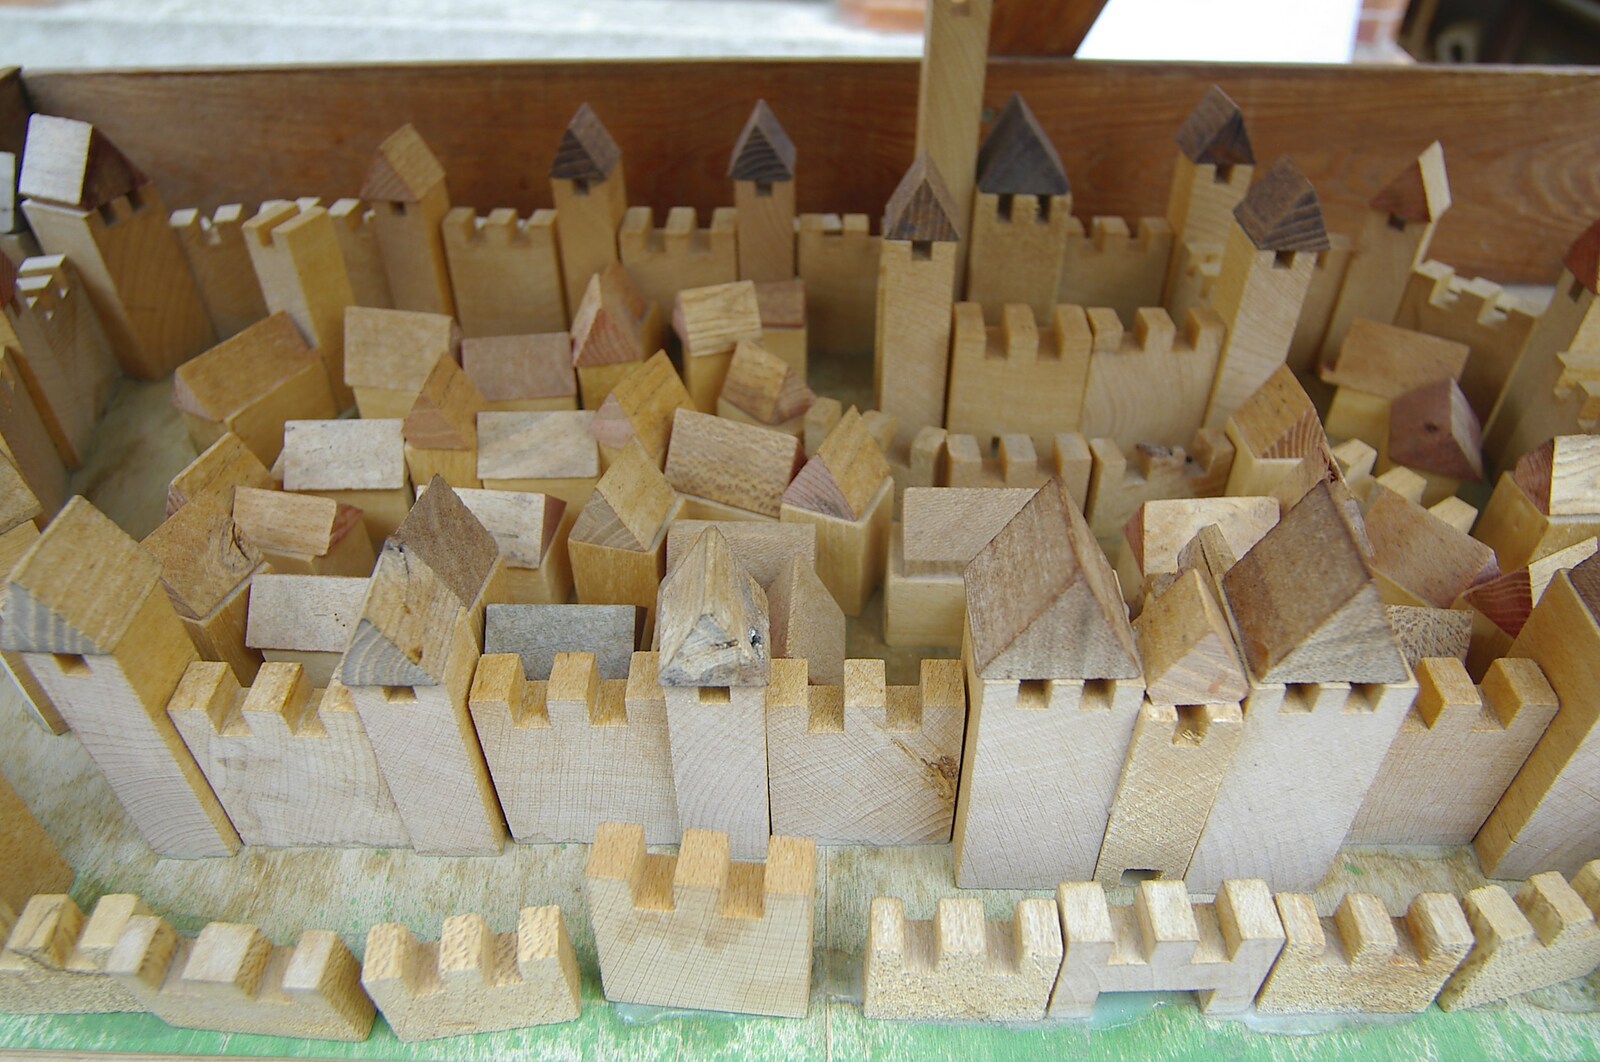 There's a cute wooden model of Carcassonne from A Couple of Days in Carcassonne, Aude, France - 21st September 2006